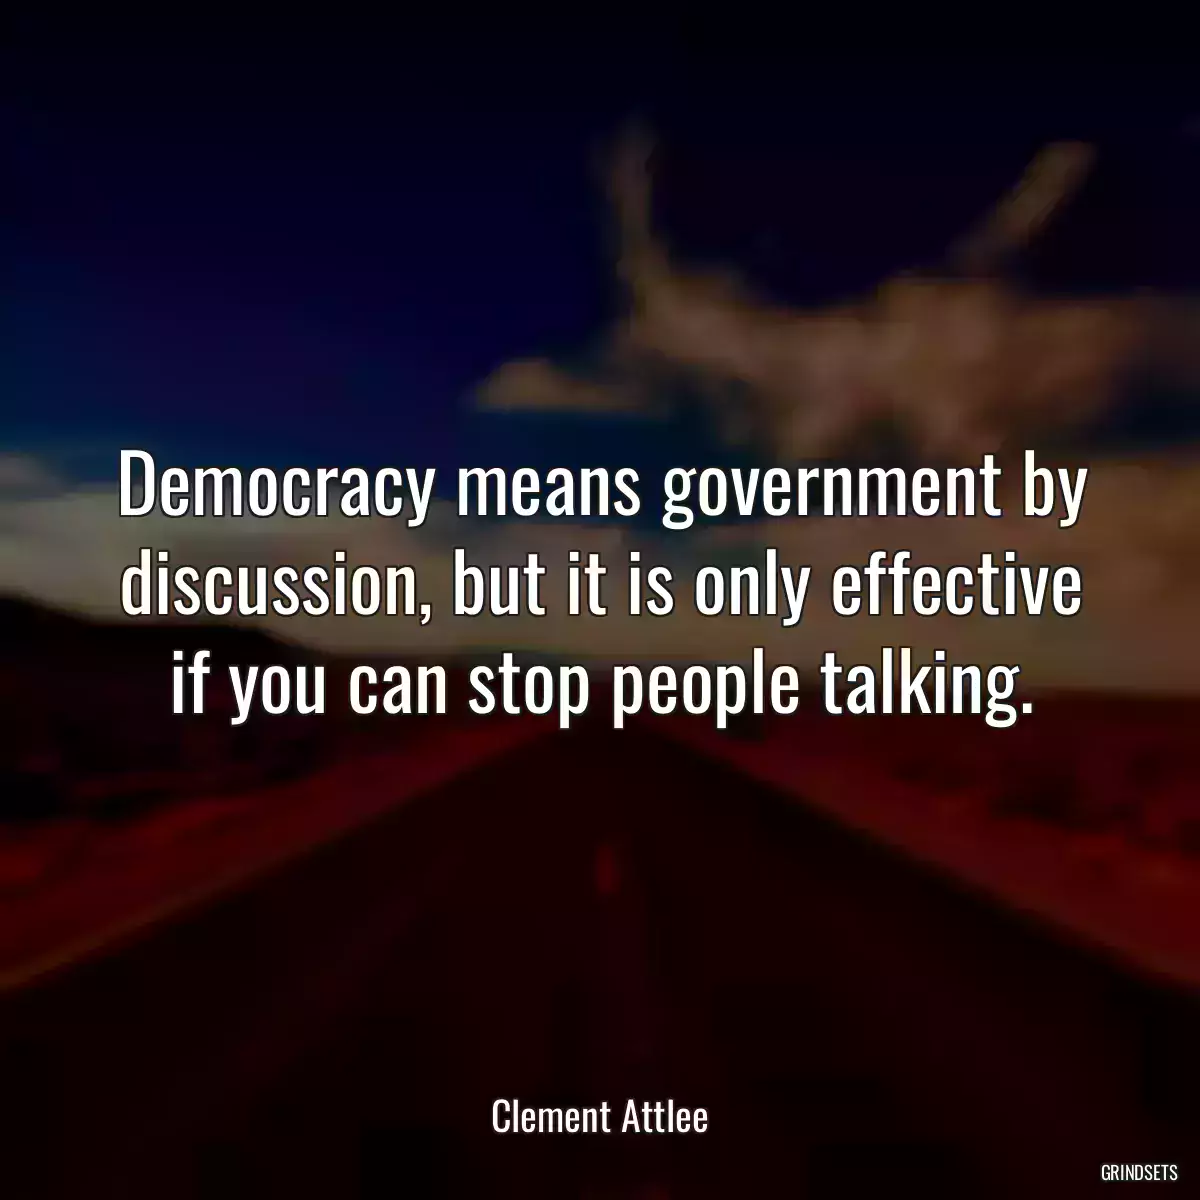 Democracy means government by discussion, but it is only effective if you can stop people talking.